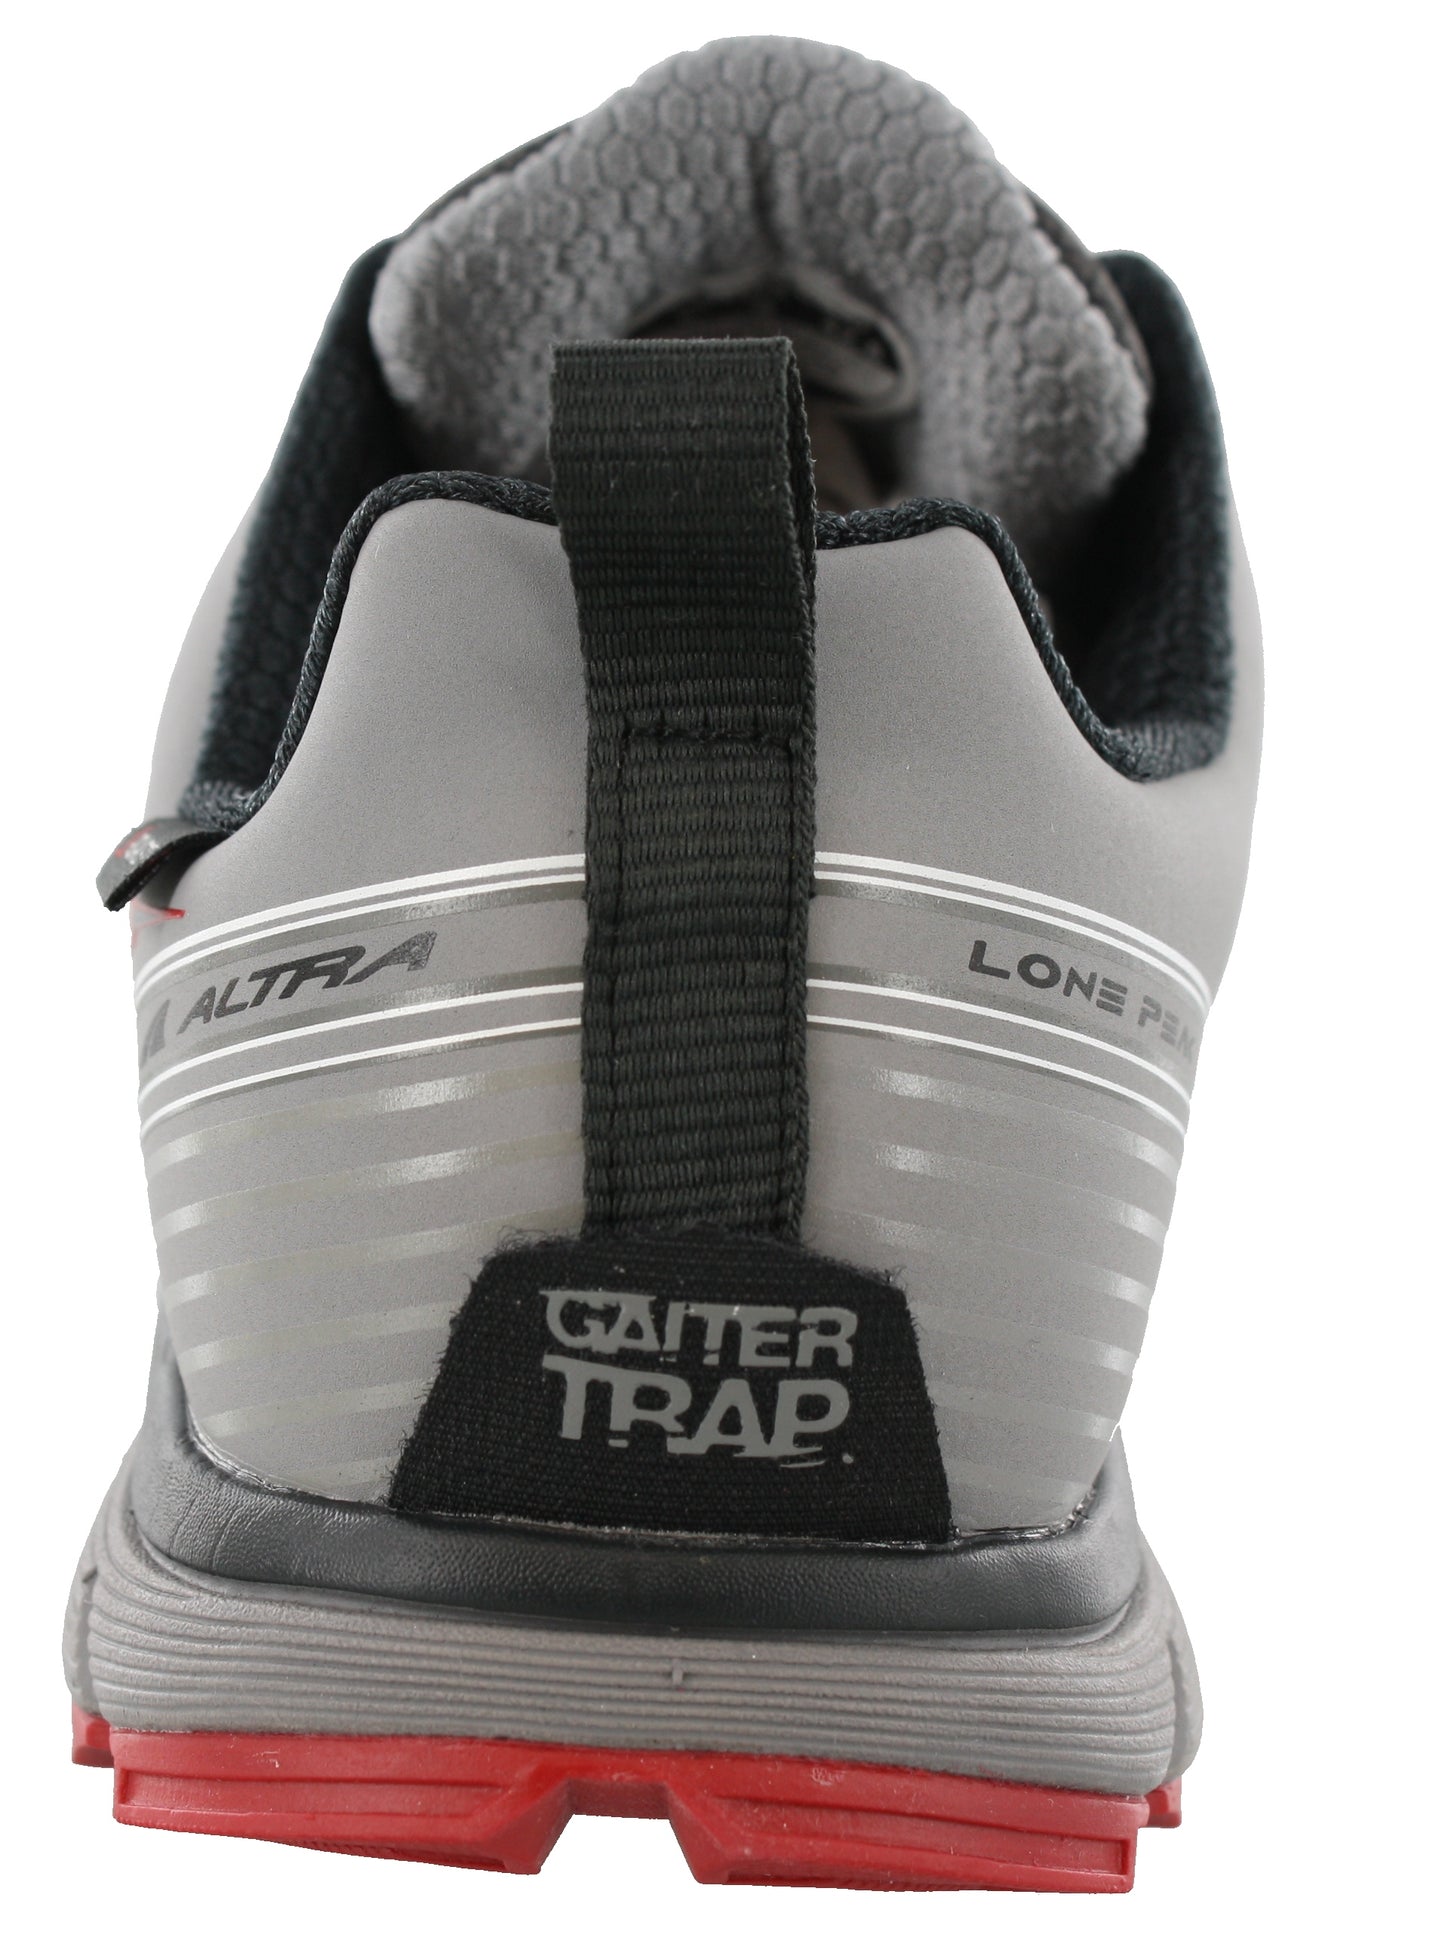 
                  
                    Back of Gray/Red3.0 Altra Mens Trail Running Lightweight Shoes Lone Peak 3.0 Neoshell
                  
                